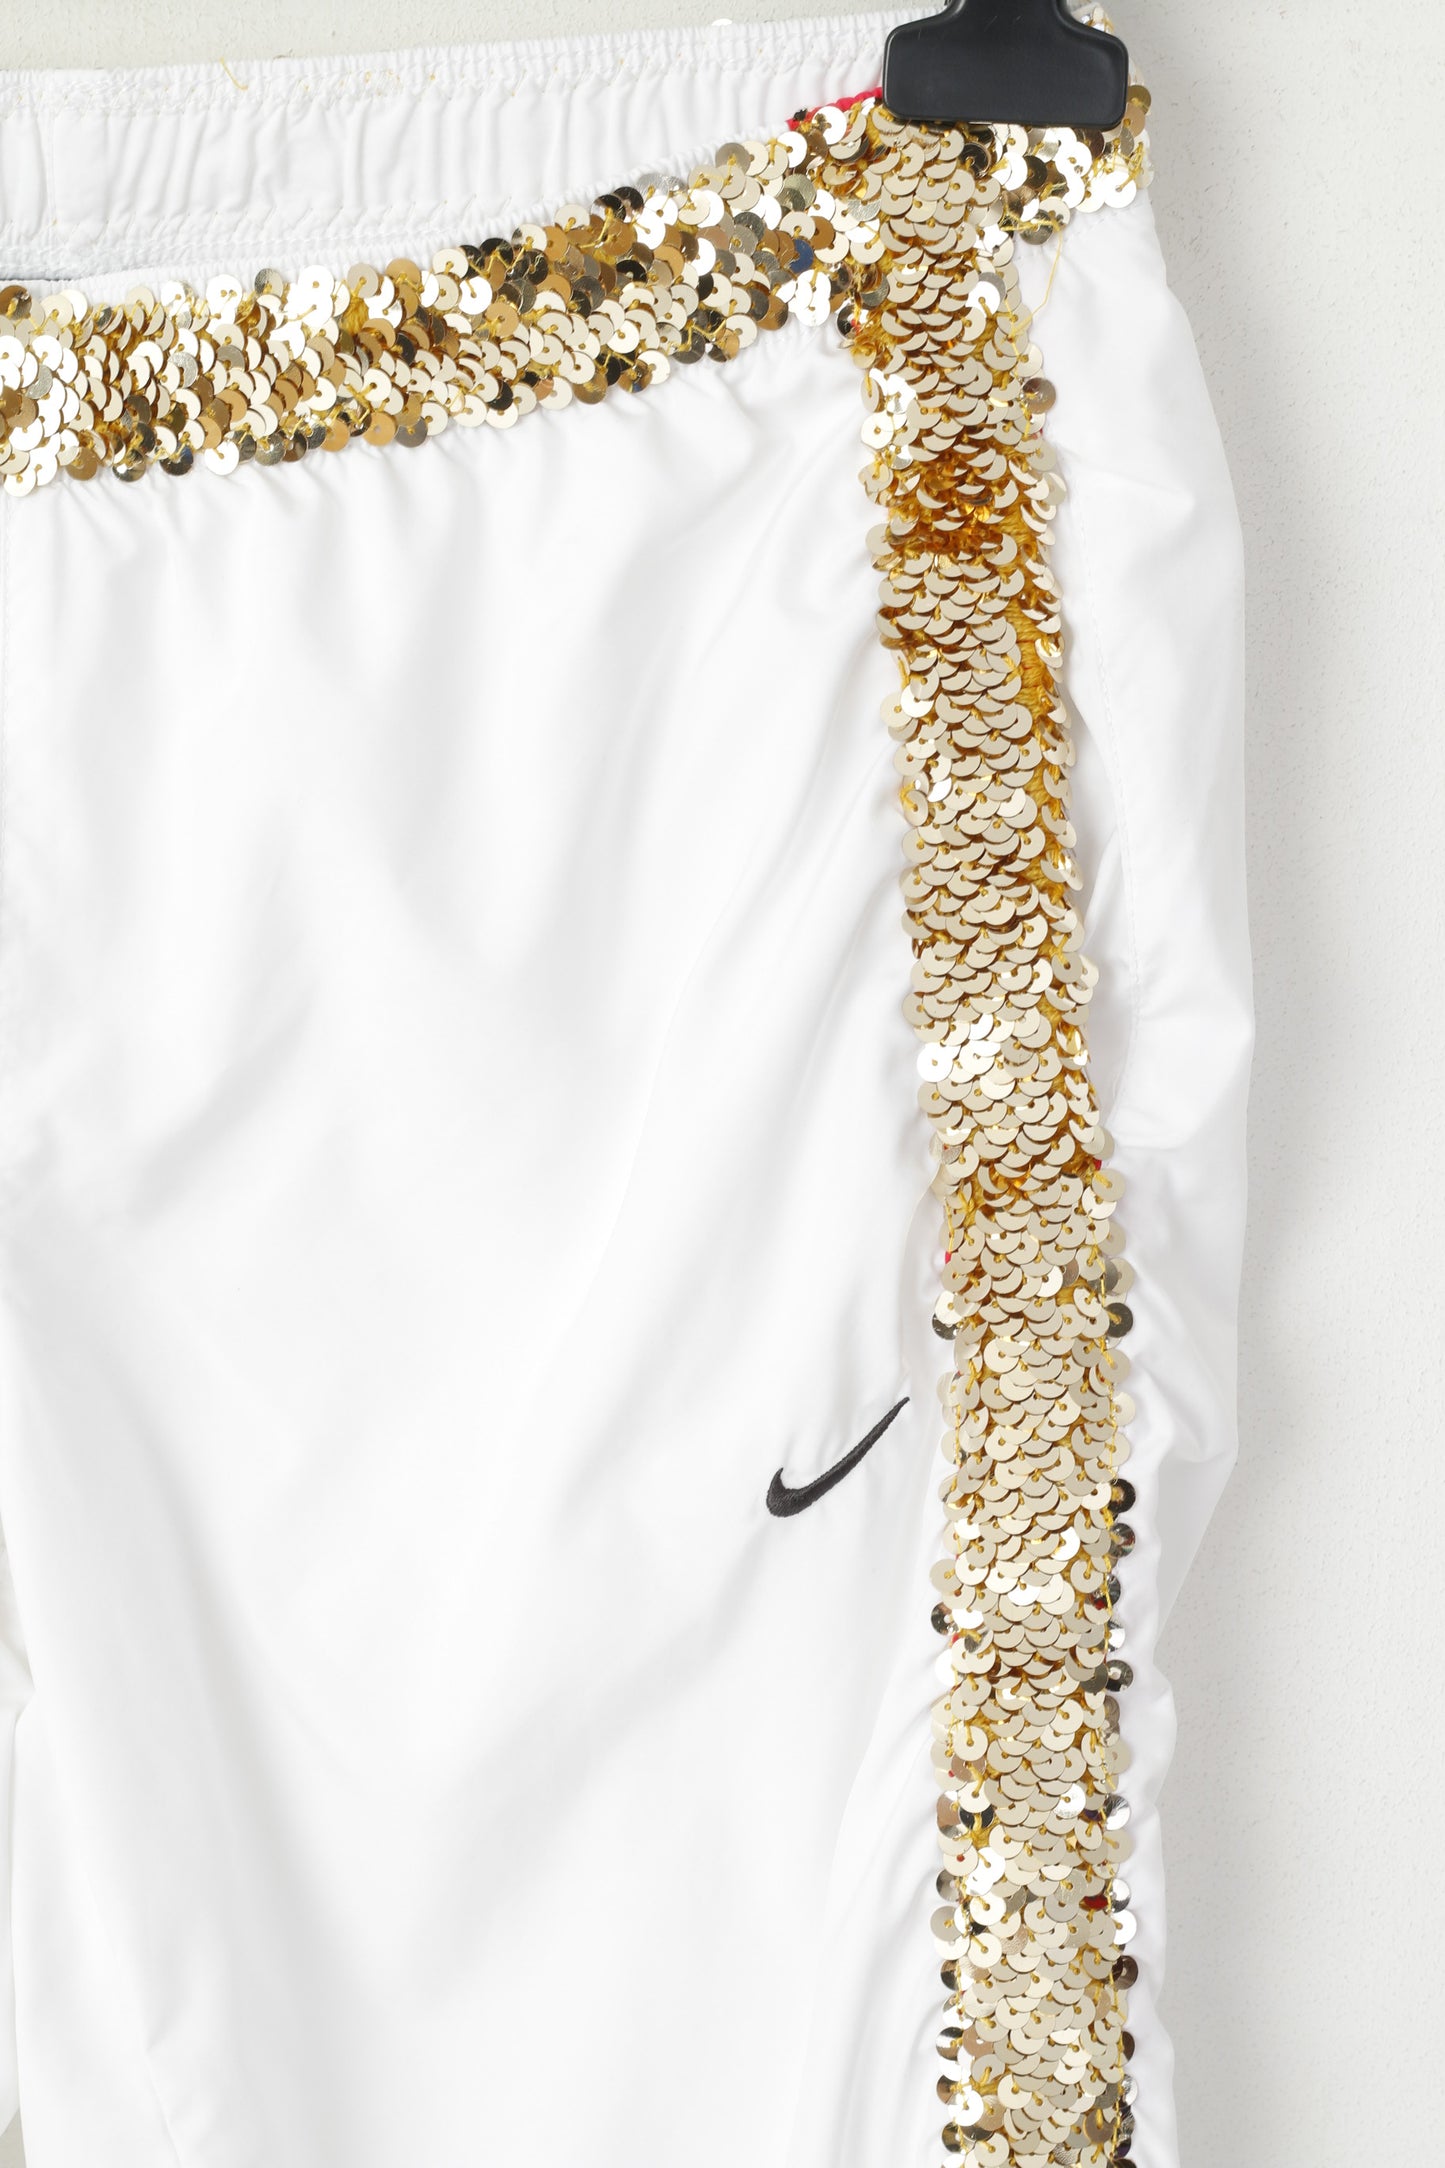 Nike Women XS Cropped Trousers White  Gold Sequins Hand Made Sport Pants